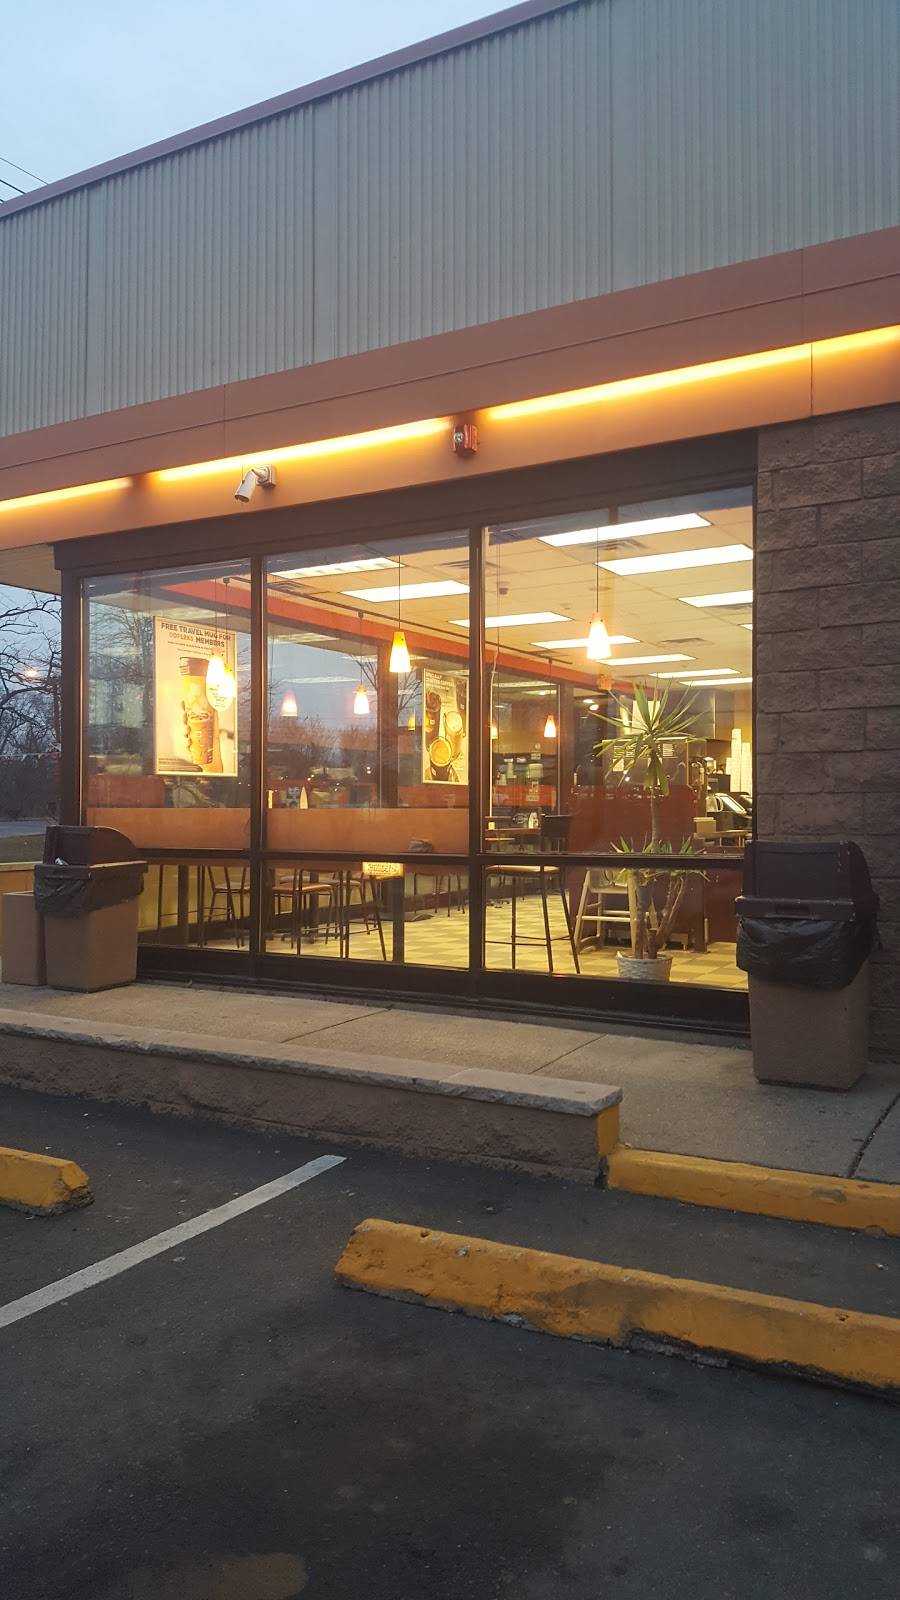 Dunkin Donuts | cafe | 39 E 33rd St, Paterson, NJ 07514, USA | 9733451535 OR +1 973-345-1535